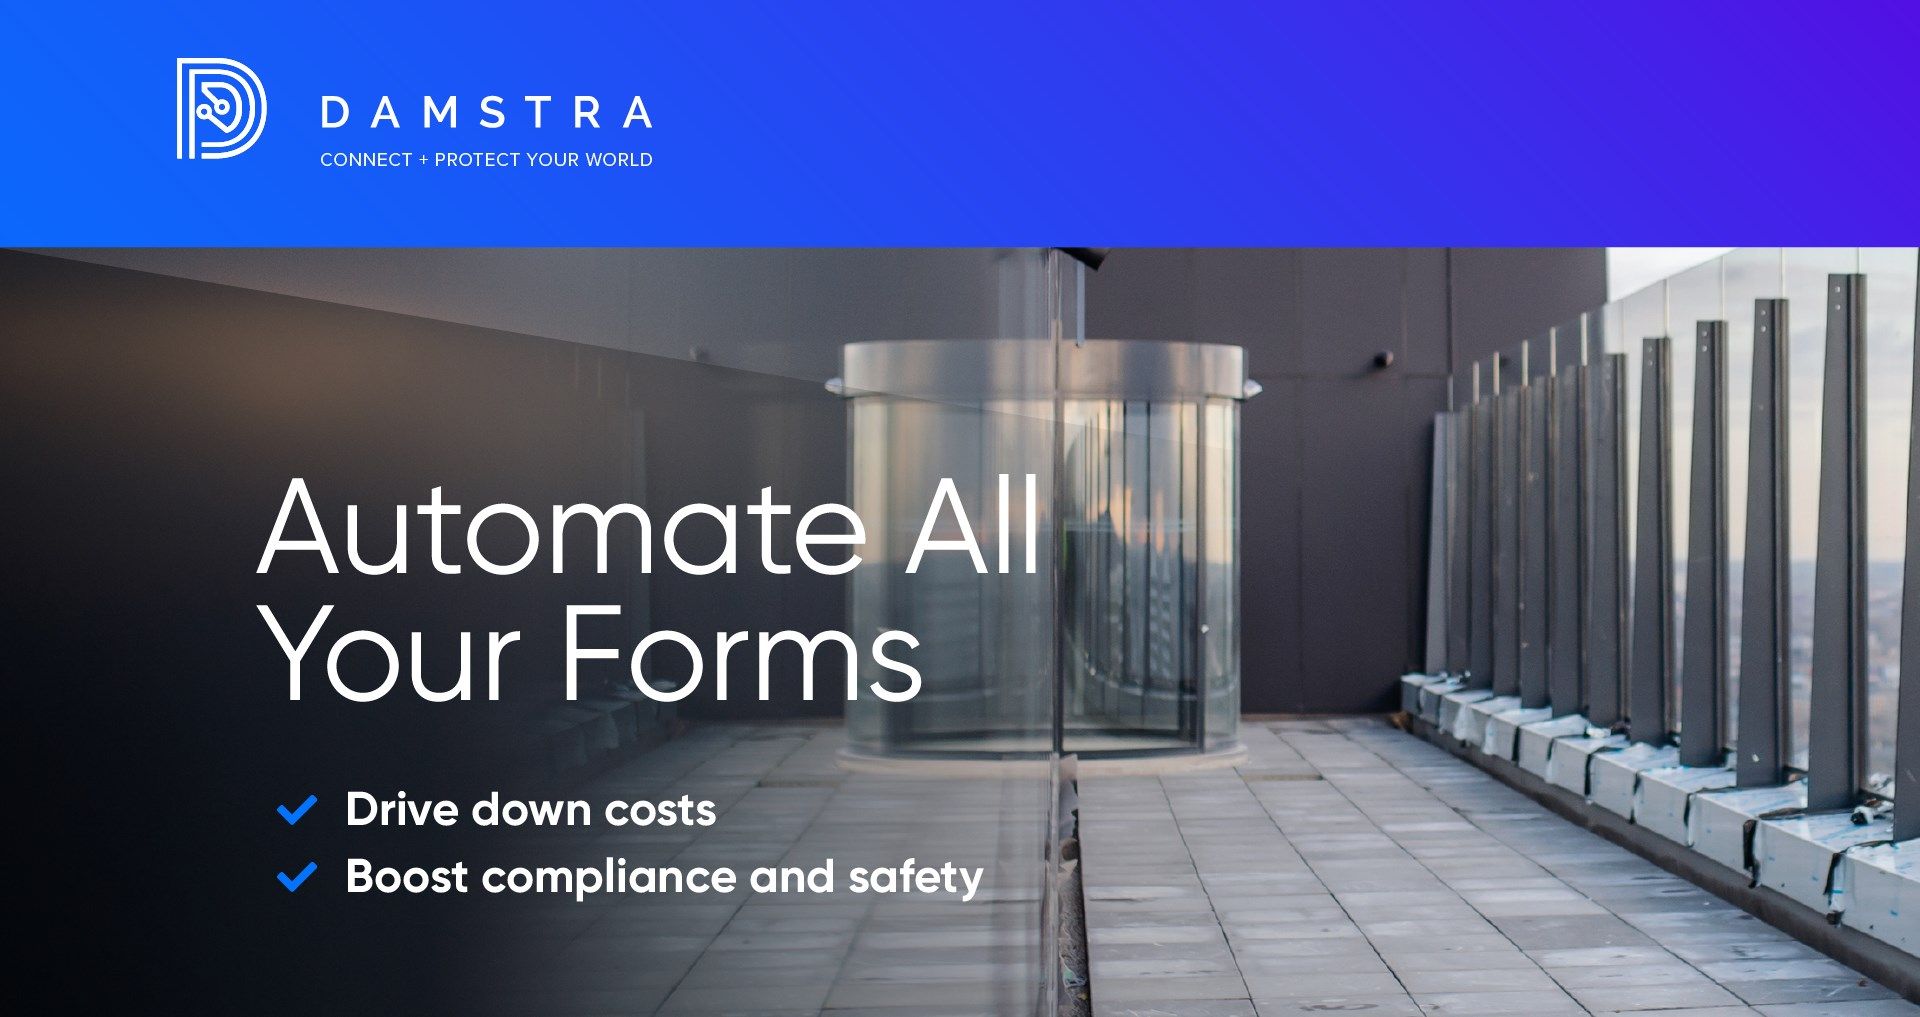 Damstra Forms